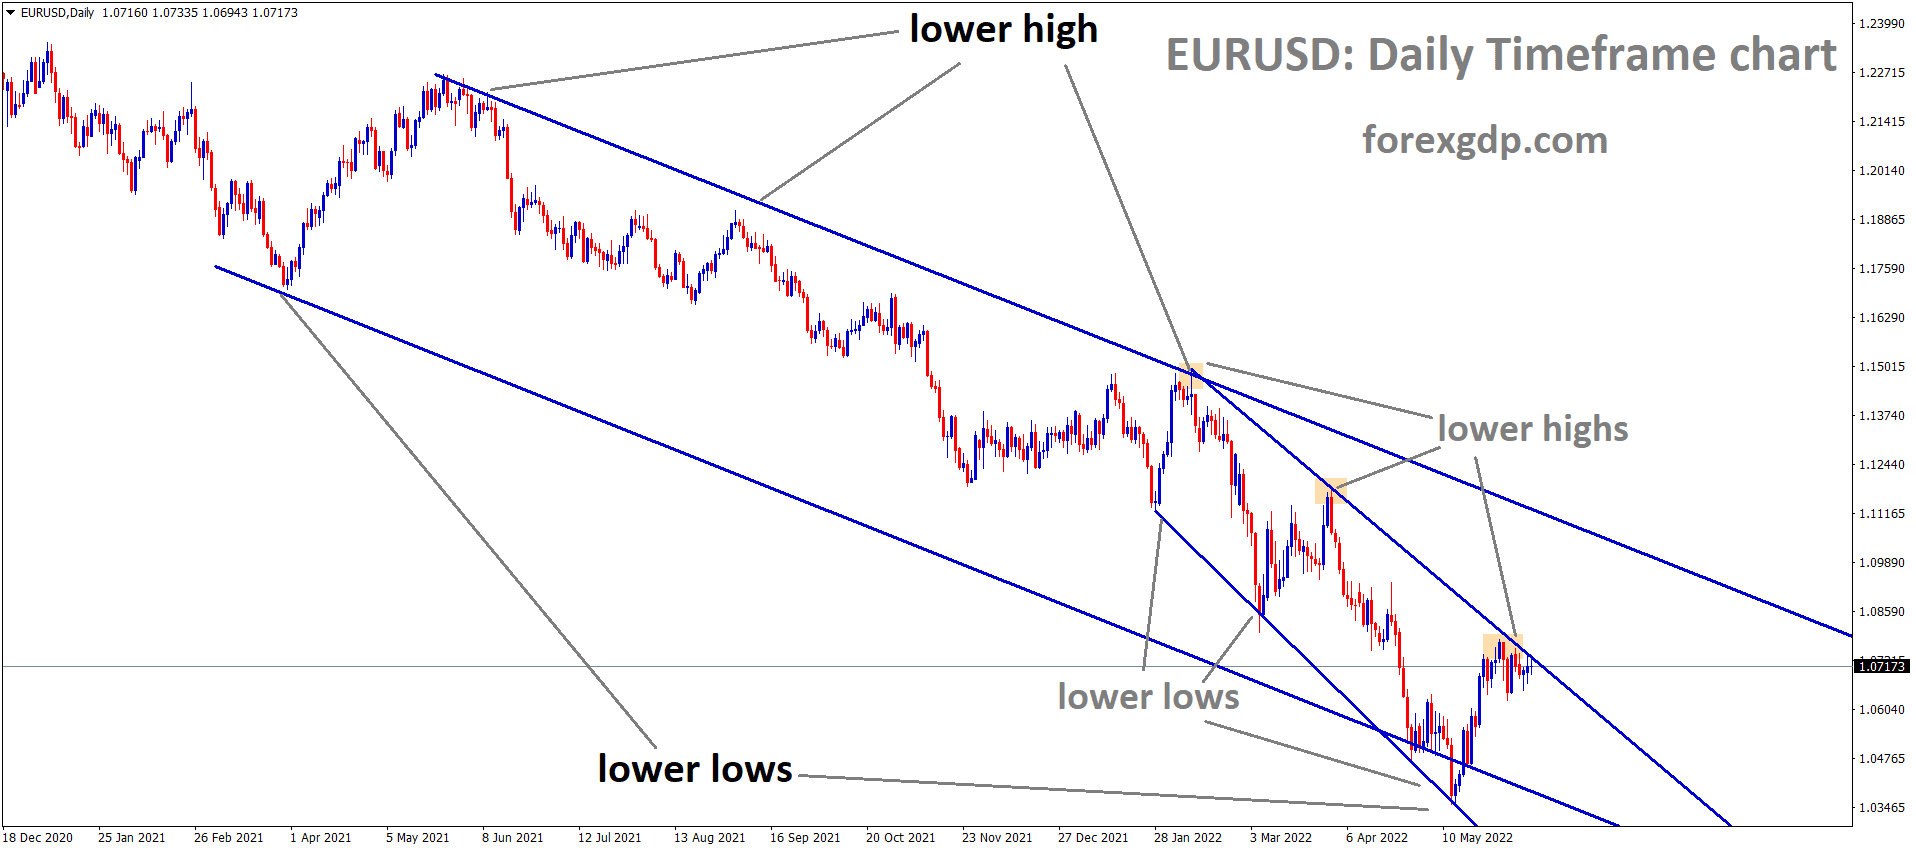 EURUSD is moving in the major Descending channel and the Market has reached the Lower high area of the Minor Descending channel.